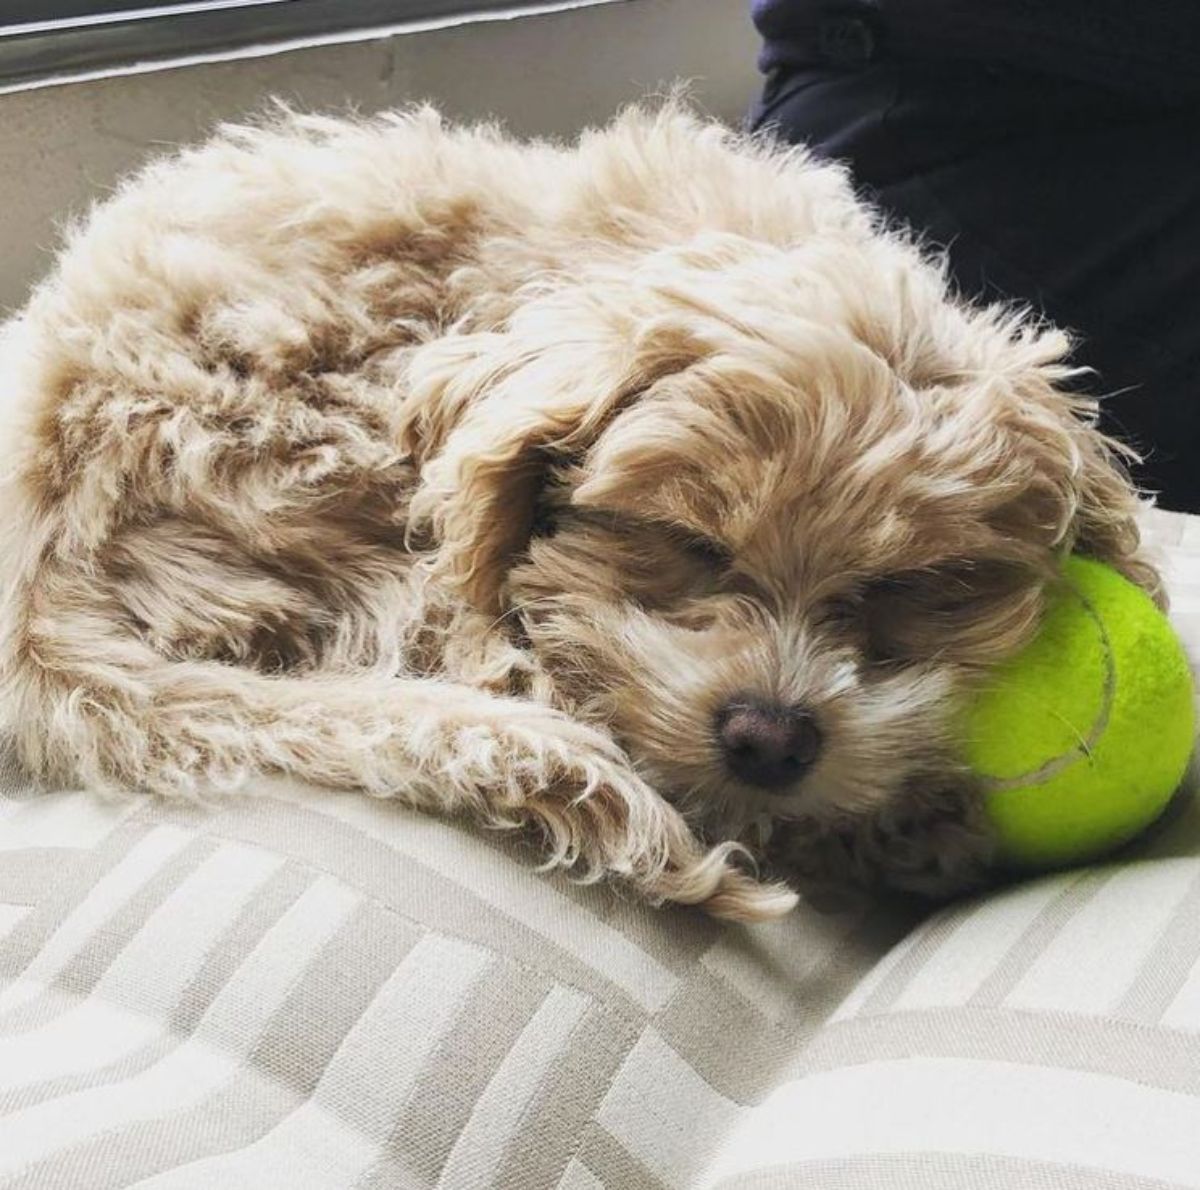 sleeping cockerdoodle puppy with its ball